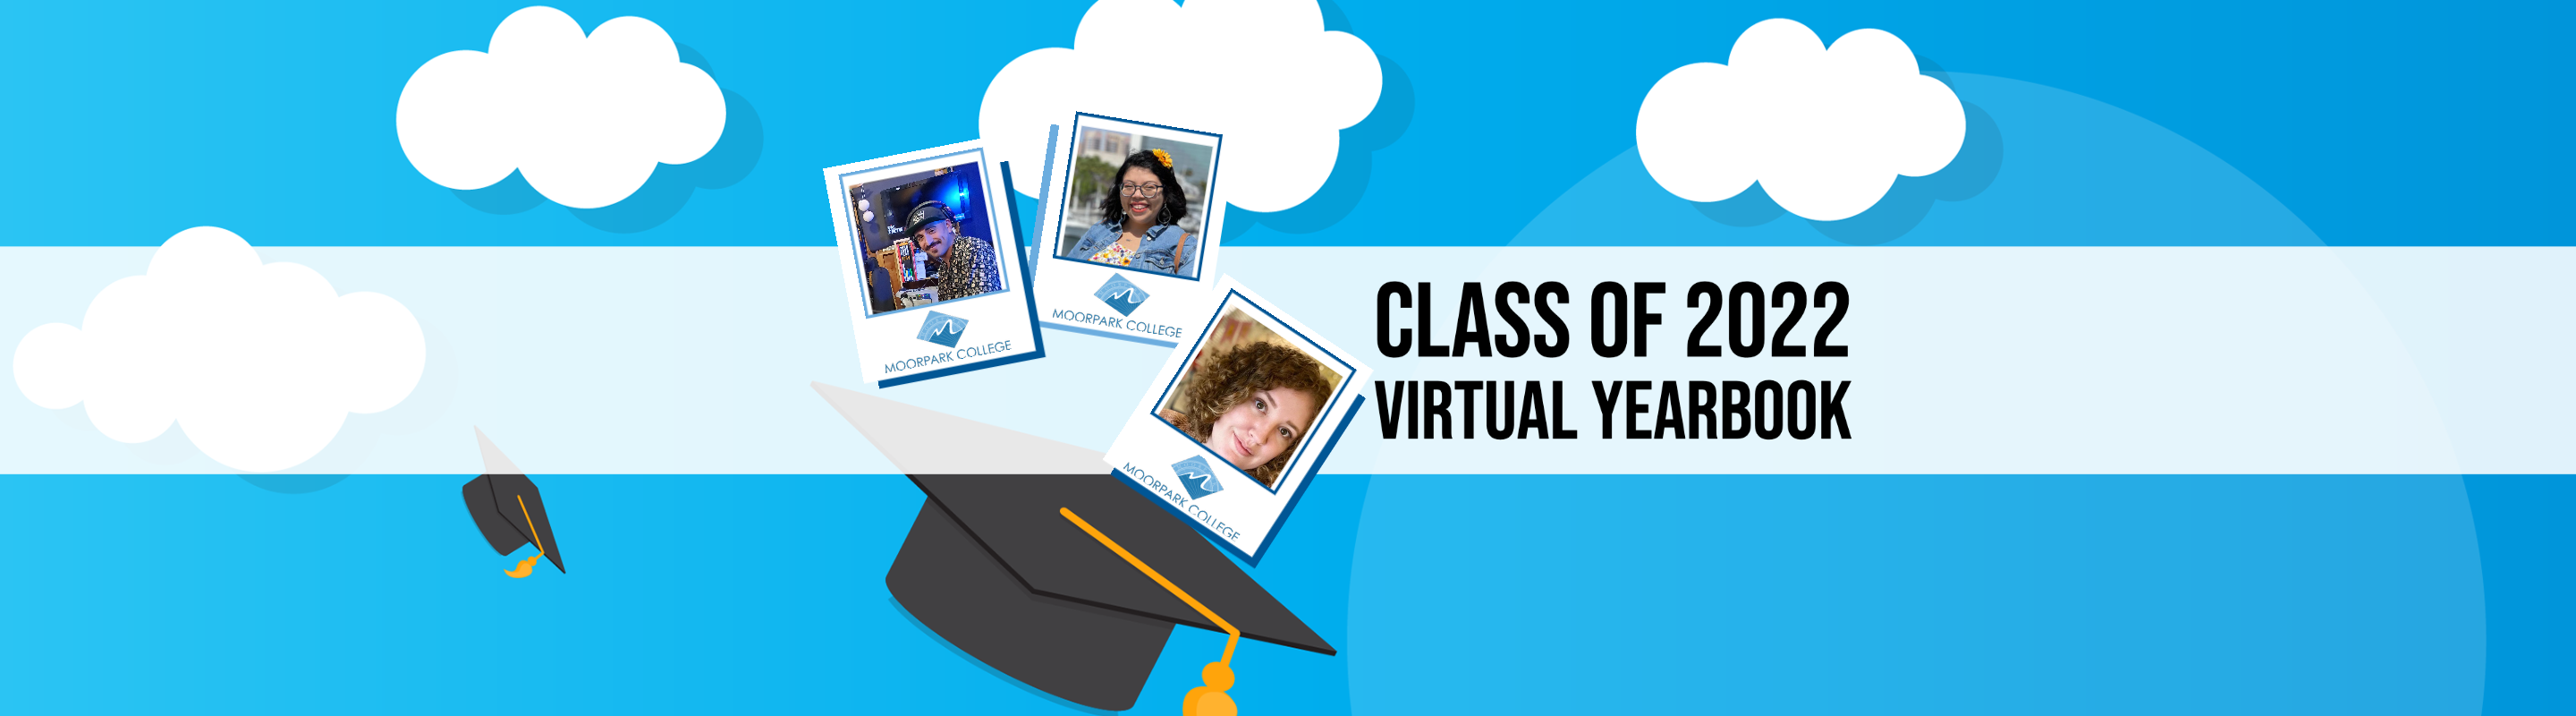 Graduation cap in front of a blue sky with clouds. Polaroid photos of graduates. Text that reads: Class of 2022 Virtual Yearbook